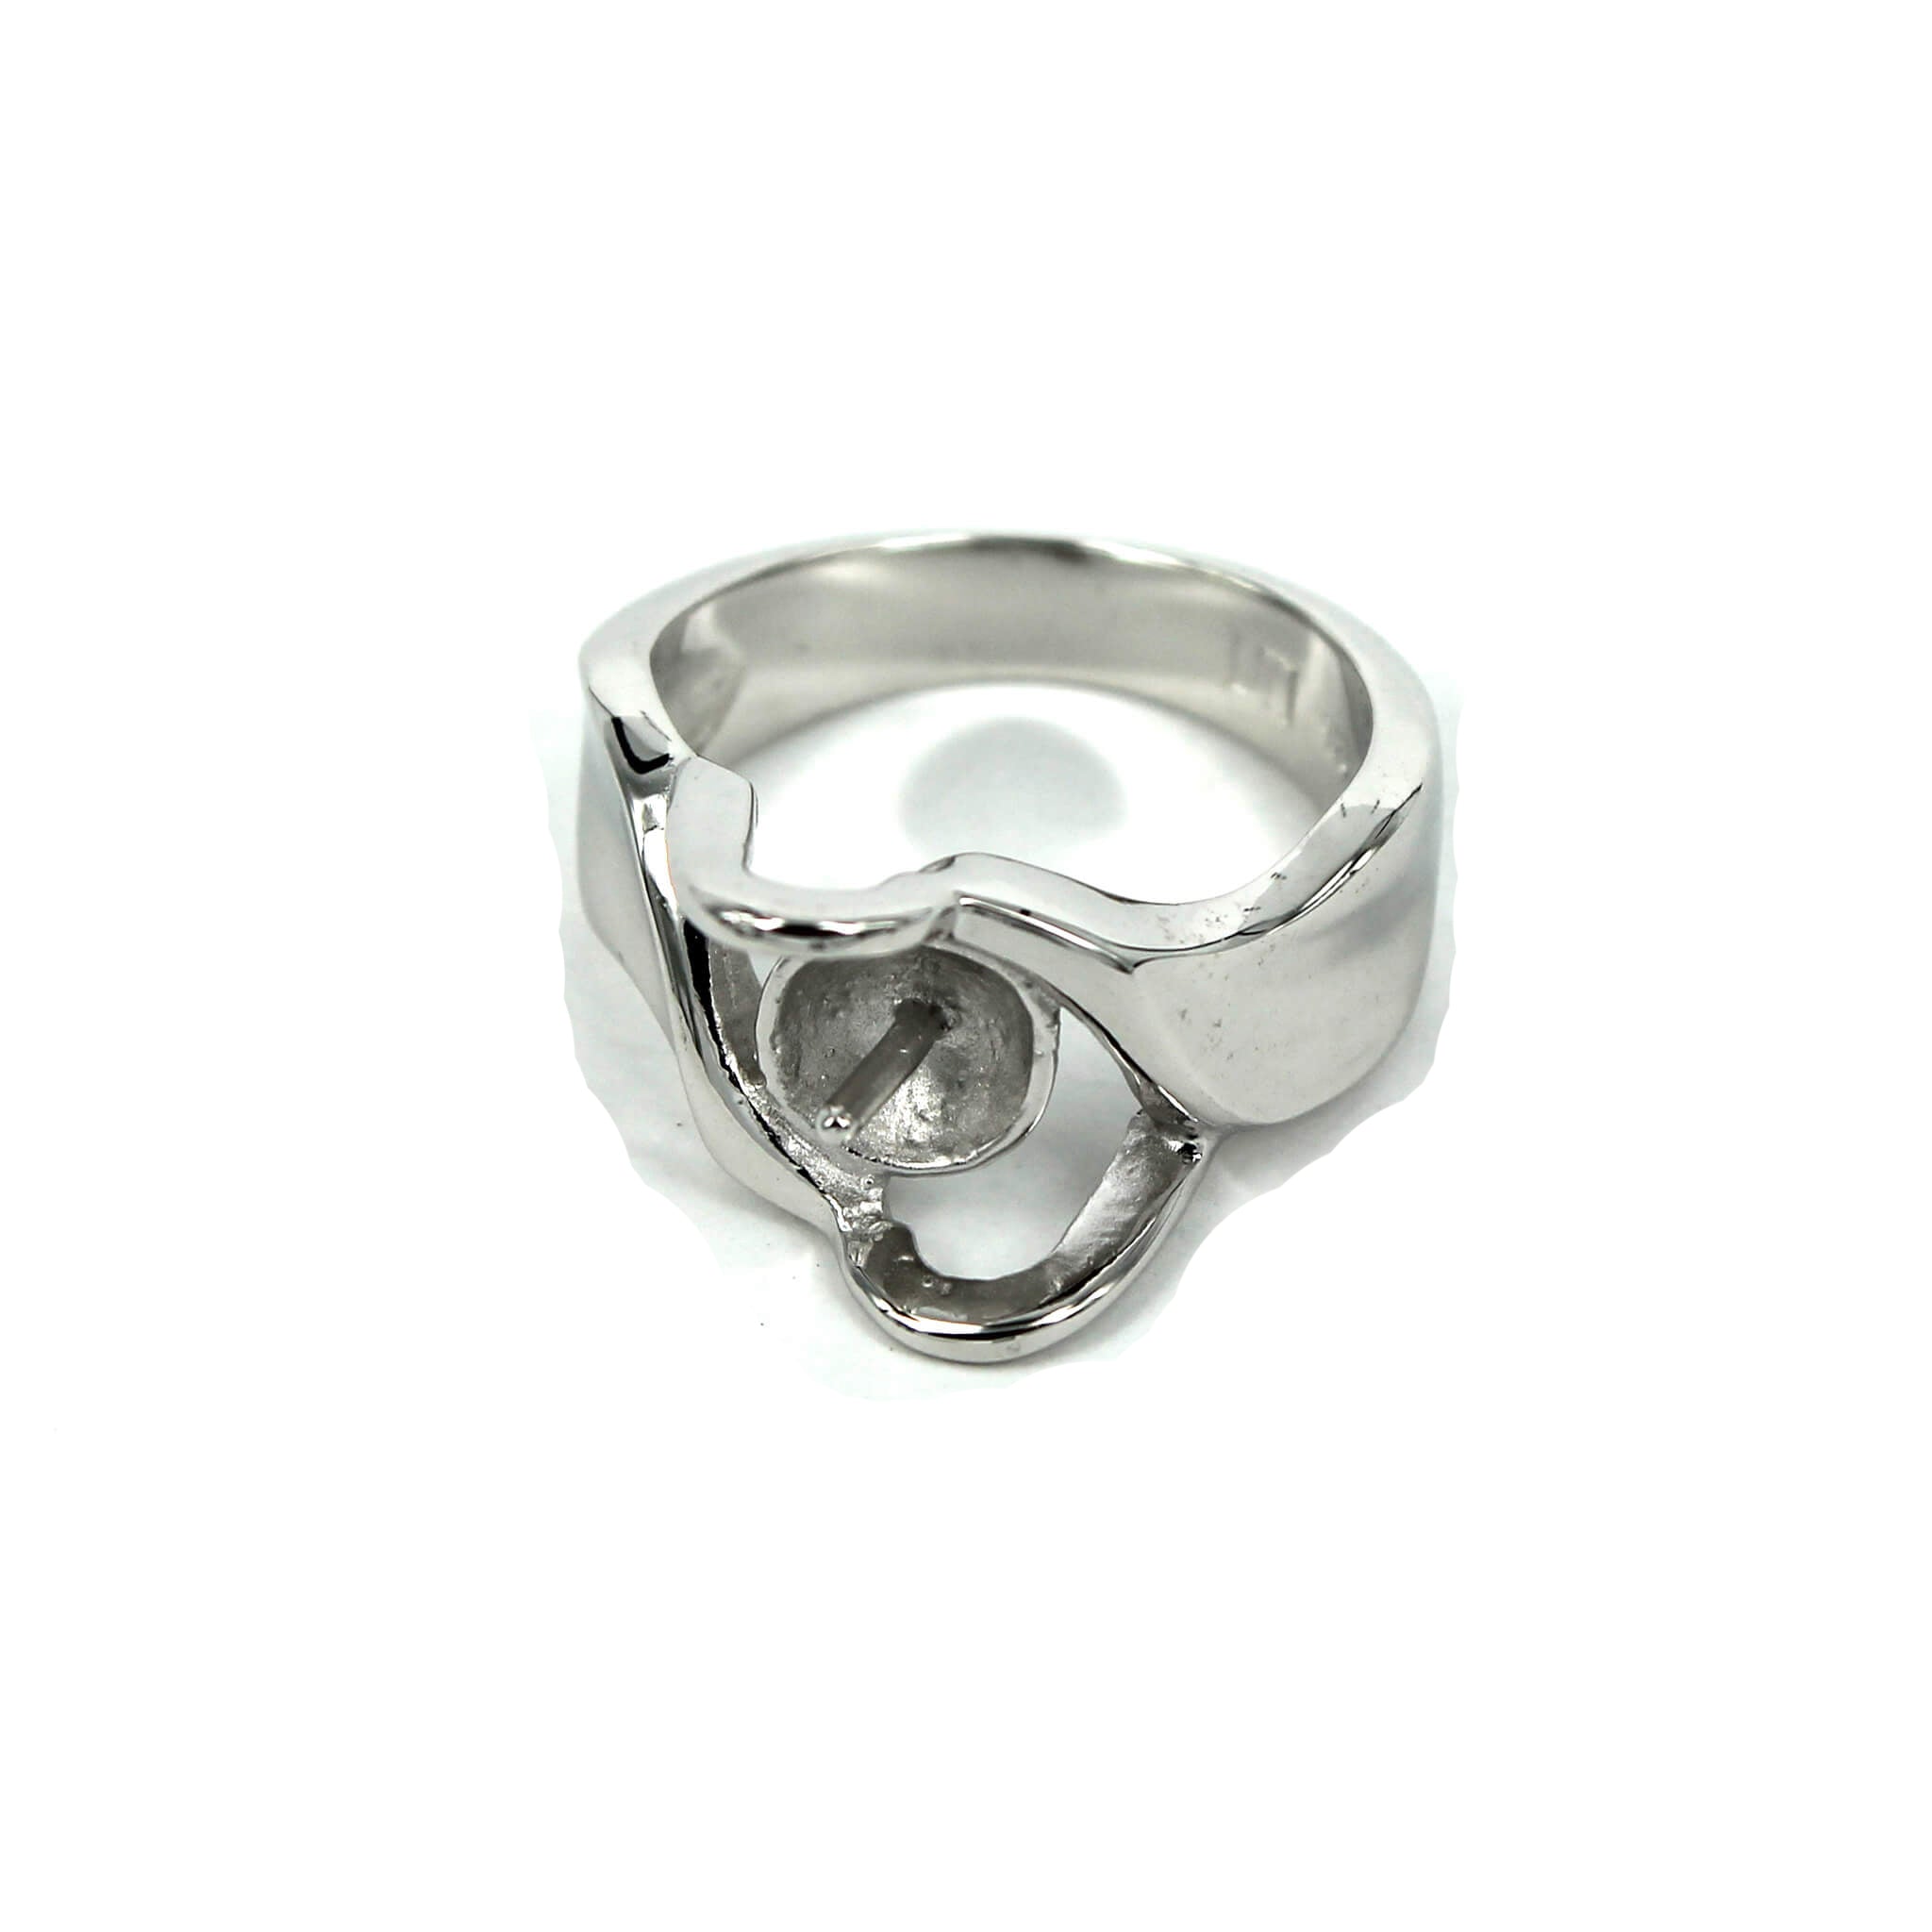 Wavy Cross-Over Ring with Peg Mounting in Sterling Silver 10mm